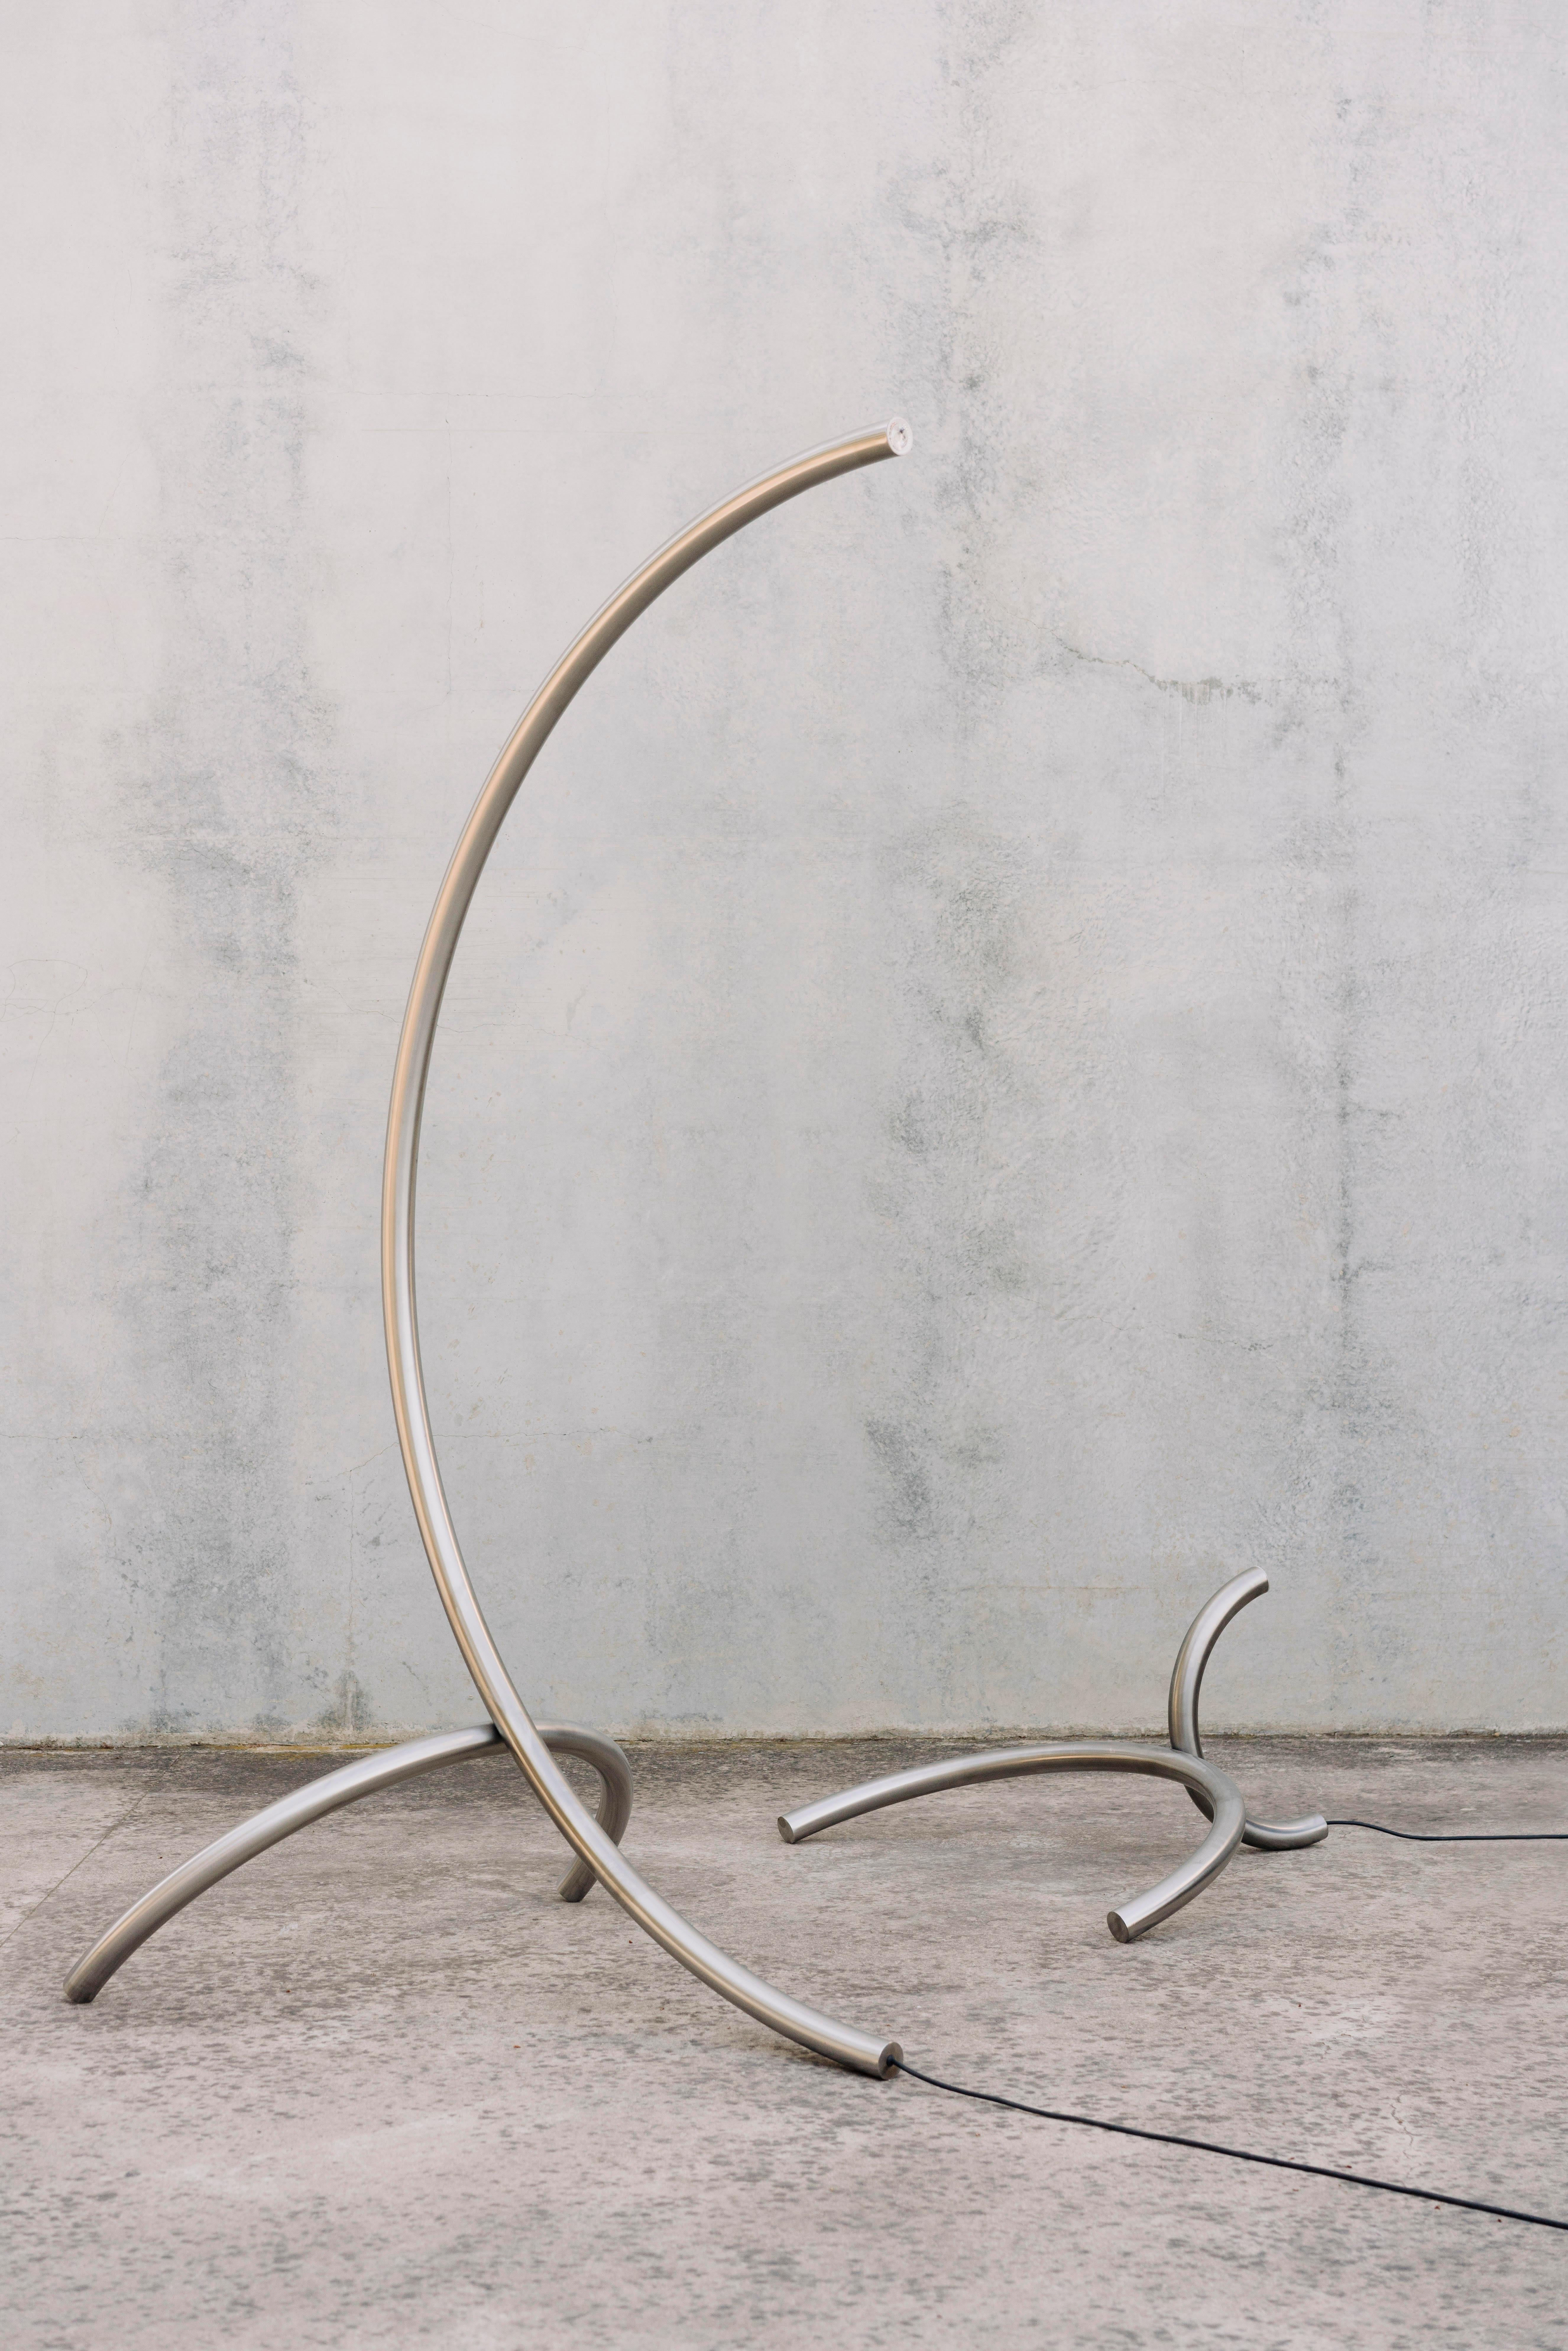 Playing with the narrow line between design and pure aesthetics, Max Enrich focusses on a constant search for bold and suggesting forms which can be used as a chair, as a table or as a sculpture. It’s all about coming up with a functional solution -